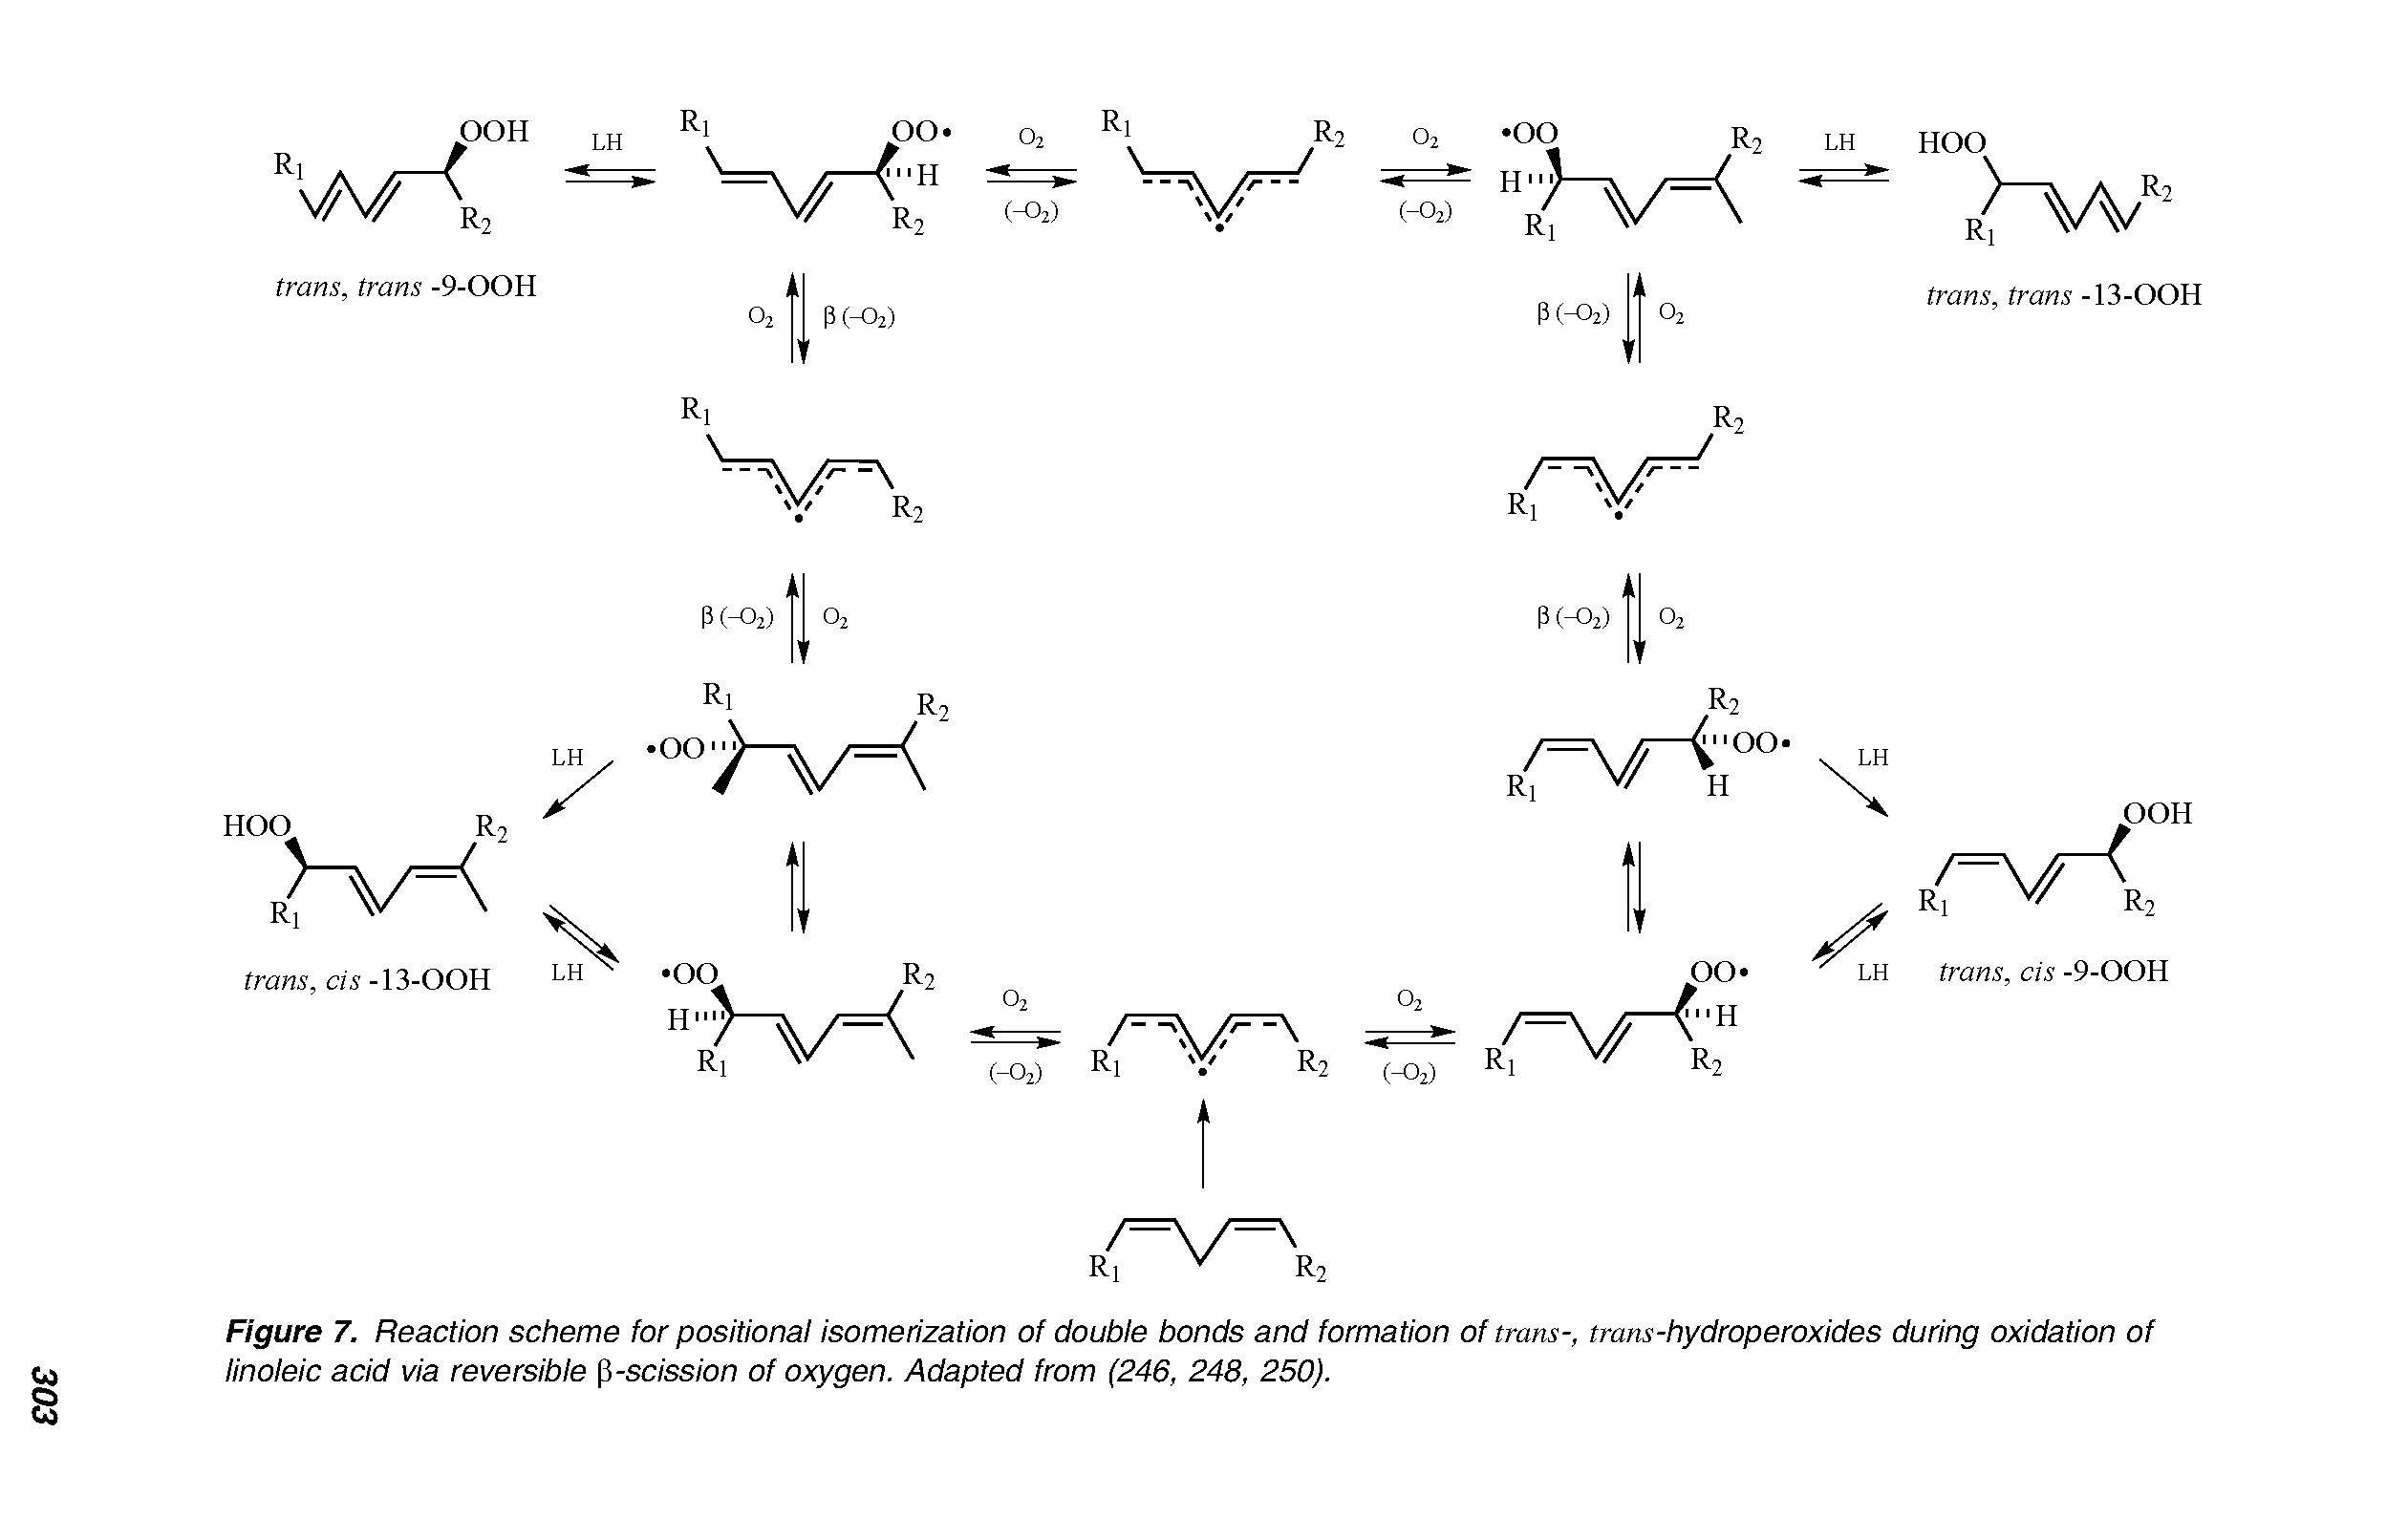 Figure 7. Reaction scheme for positional isomerization of double bonds and formation of trans-, trans-hydroperoxides during oxidation of linoleic acid via reversible p-scission of oxygen. Adapted from (246, 248, 250).